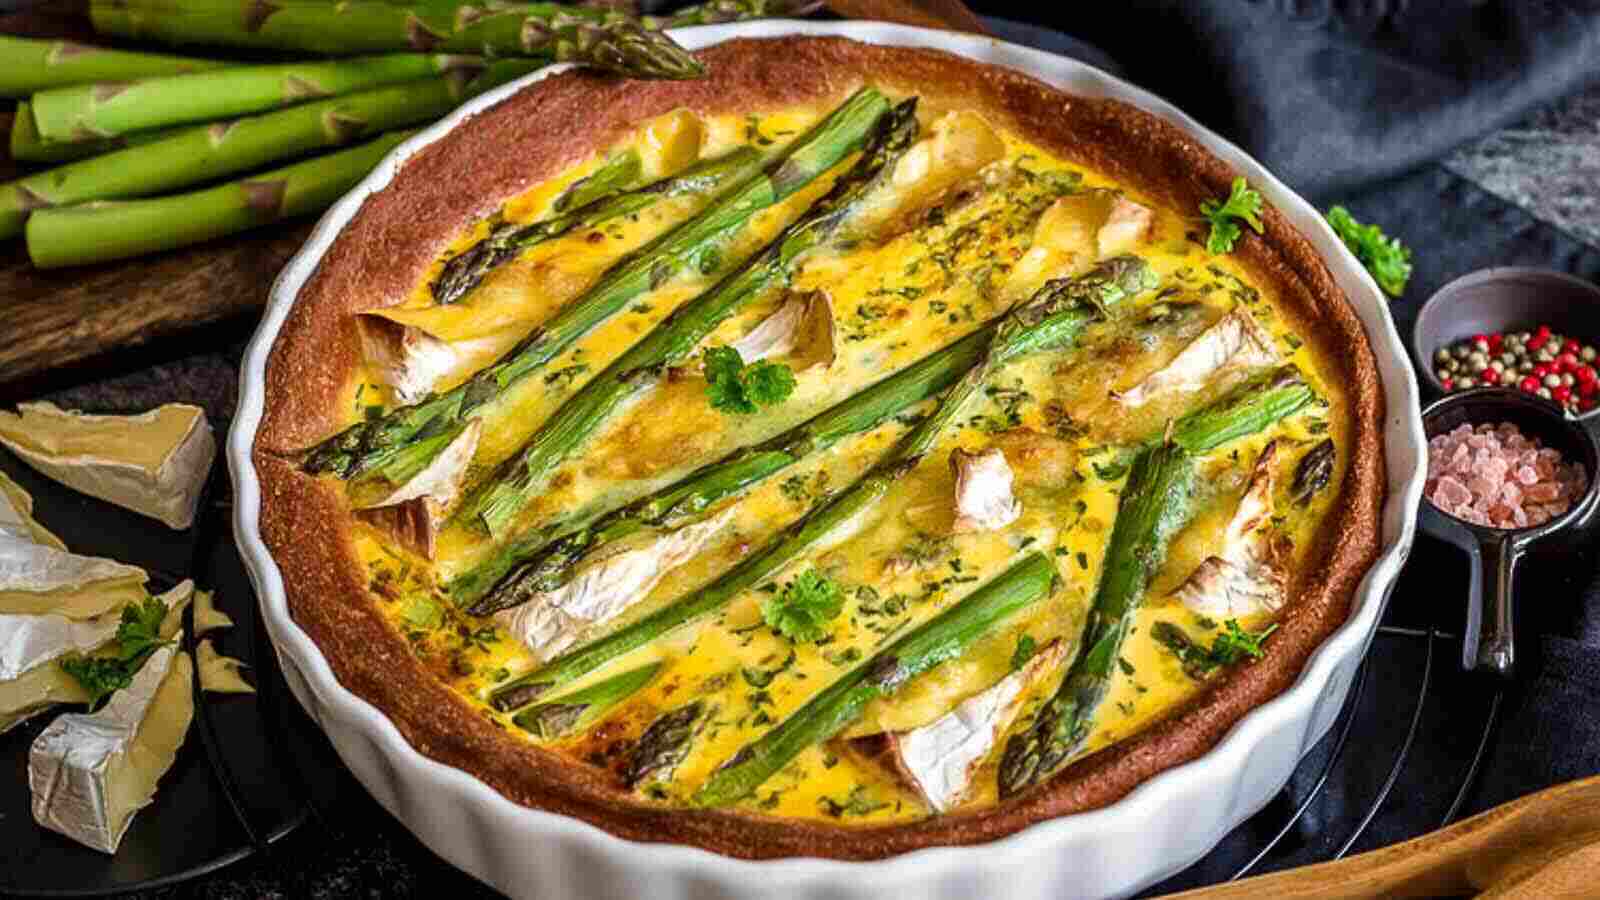 A quiche with asparagus and cheese inside casserole.